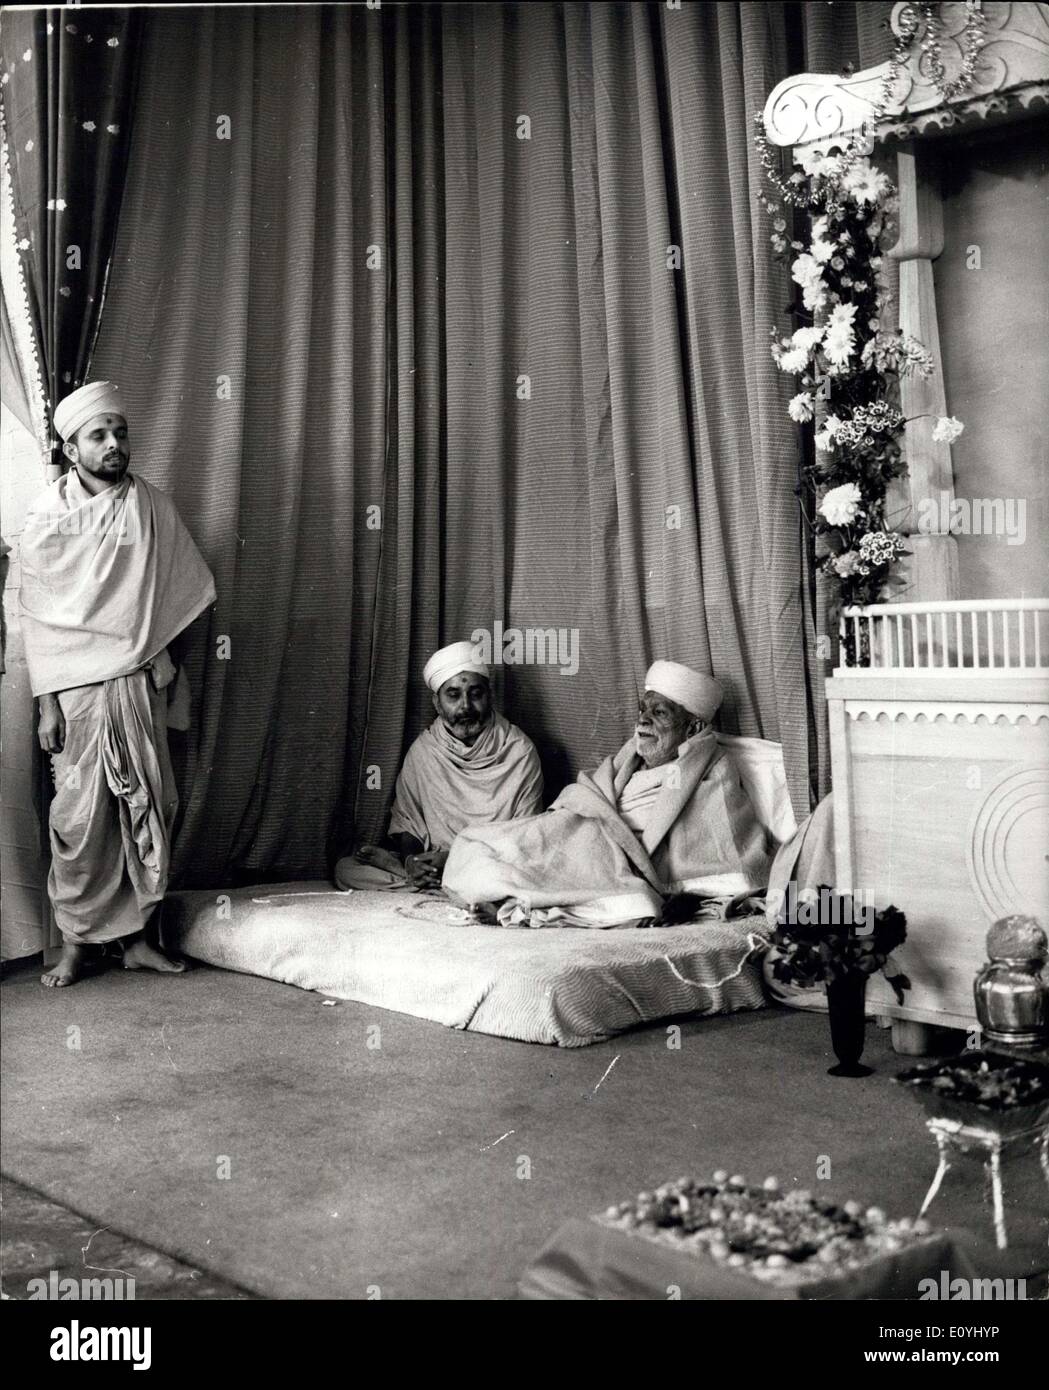 Jun. 15, 1970 - Hindu Holy man opens temple in London. Photo shows His Supreme Highness Shri Yogiji Maharaj, aged 80 preparing to open a Hindu temple at Yogi Hall, Shree Swaminarayan Temple, in Elmore Street, Islington, London, yesterday. The andhu flew from India with twelve priests for the ceremony, to which women were not allowed. They were accomodated in a separate room. Stock Photo